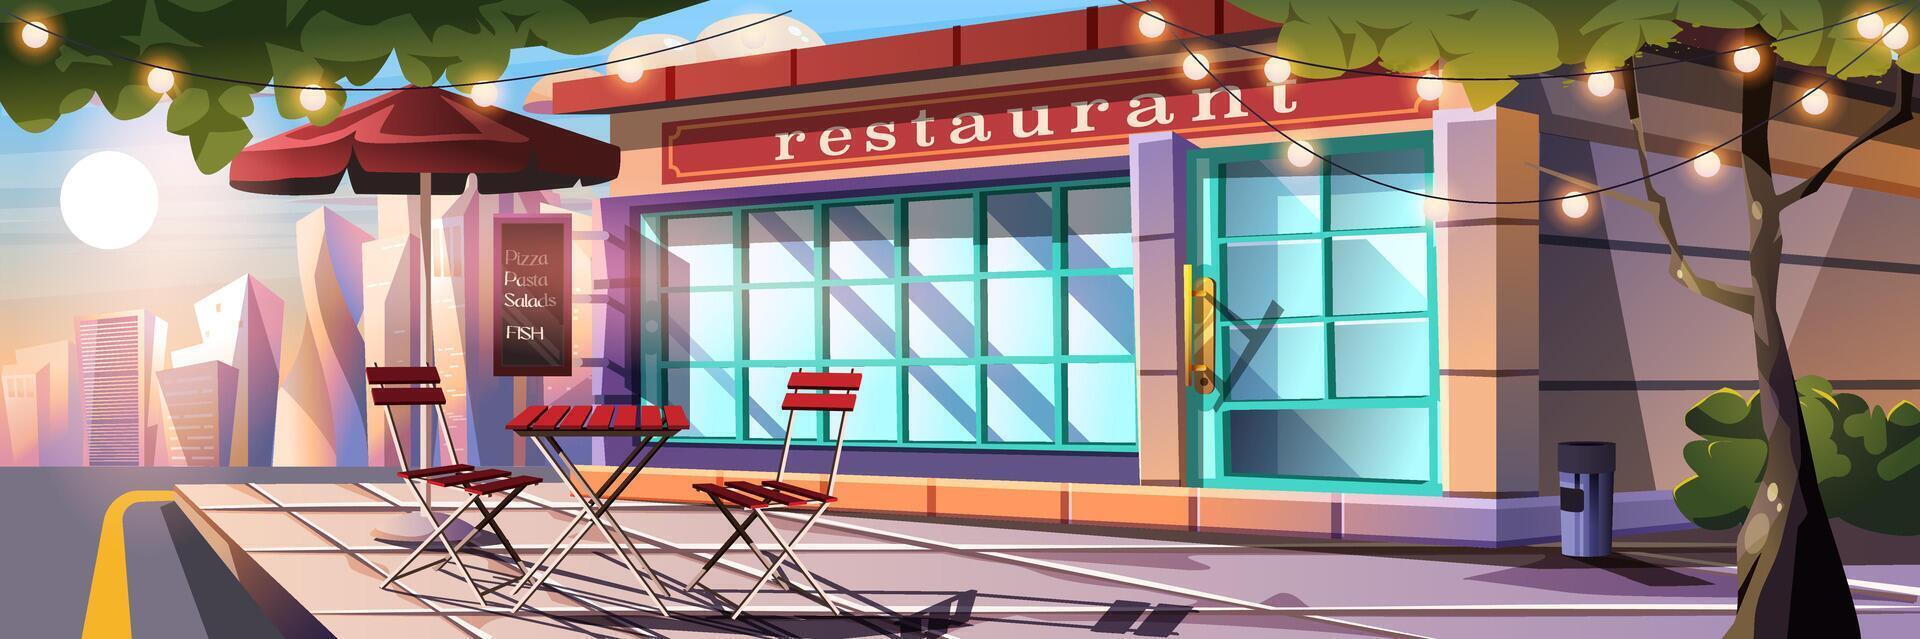 Restaurant facade background banner in flat cartoon design. Street cafeteria exterior poster with table and chairs on terrace, menu, showcase and entrance, garlands on trees. Vector illustration